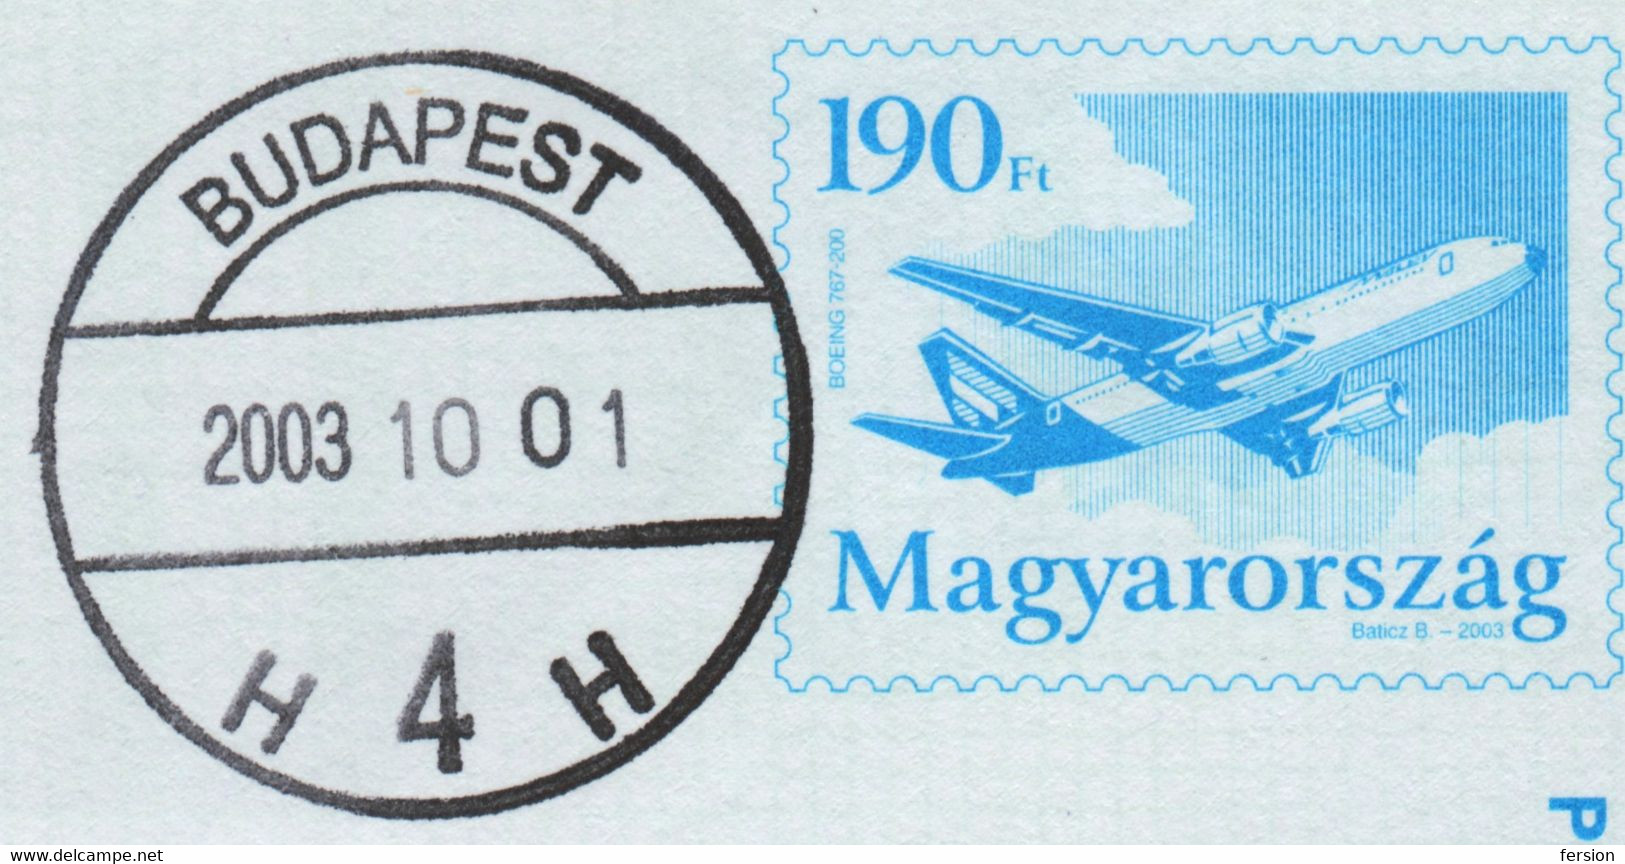 BOEING 737 MALÉV Airplane Airliner 2003 Hungary AIR MAIL PAR AVION Postal Stationery 190 Ft Cover Letter Envelope FDC - Covers & Documents